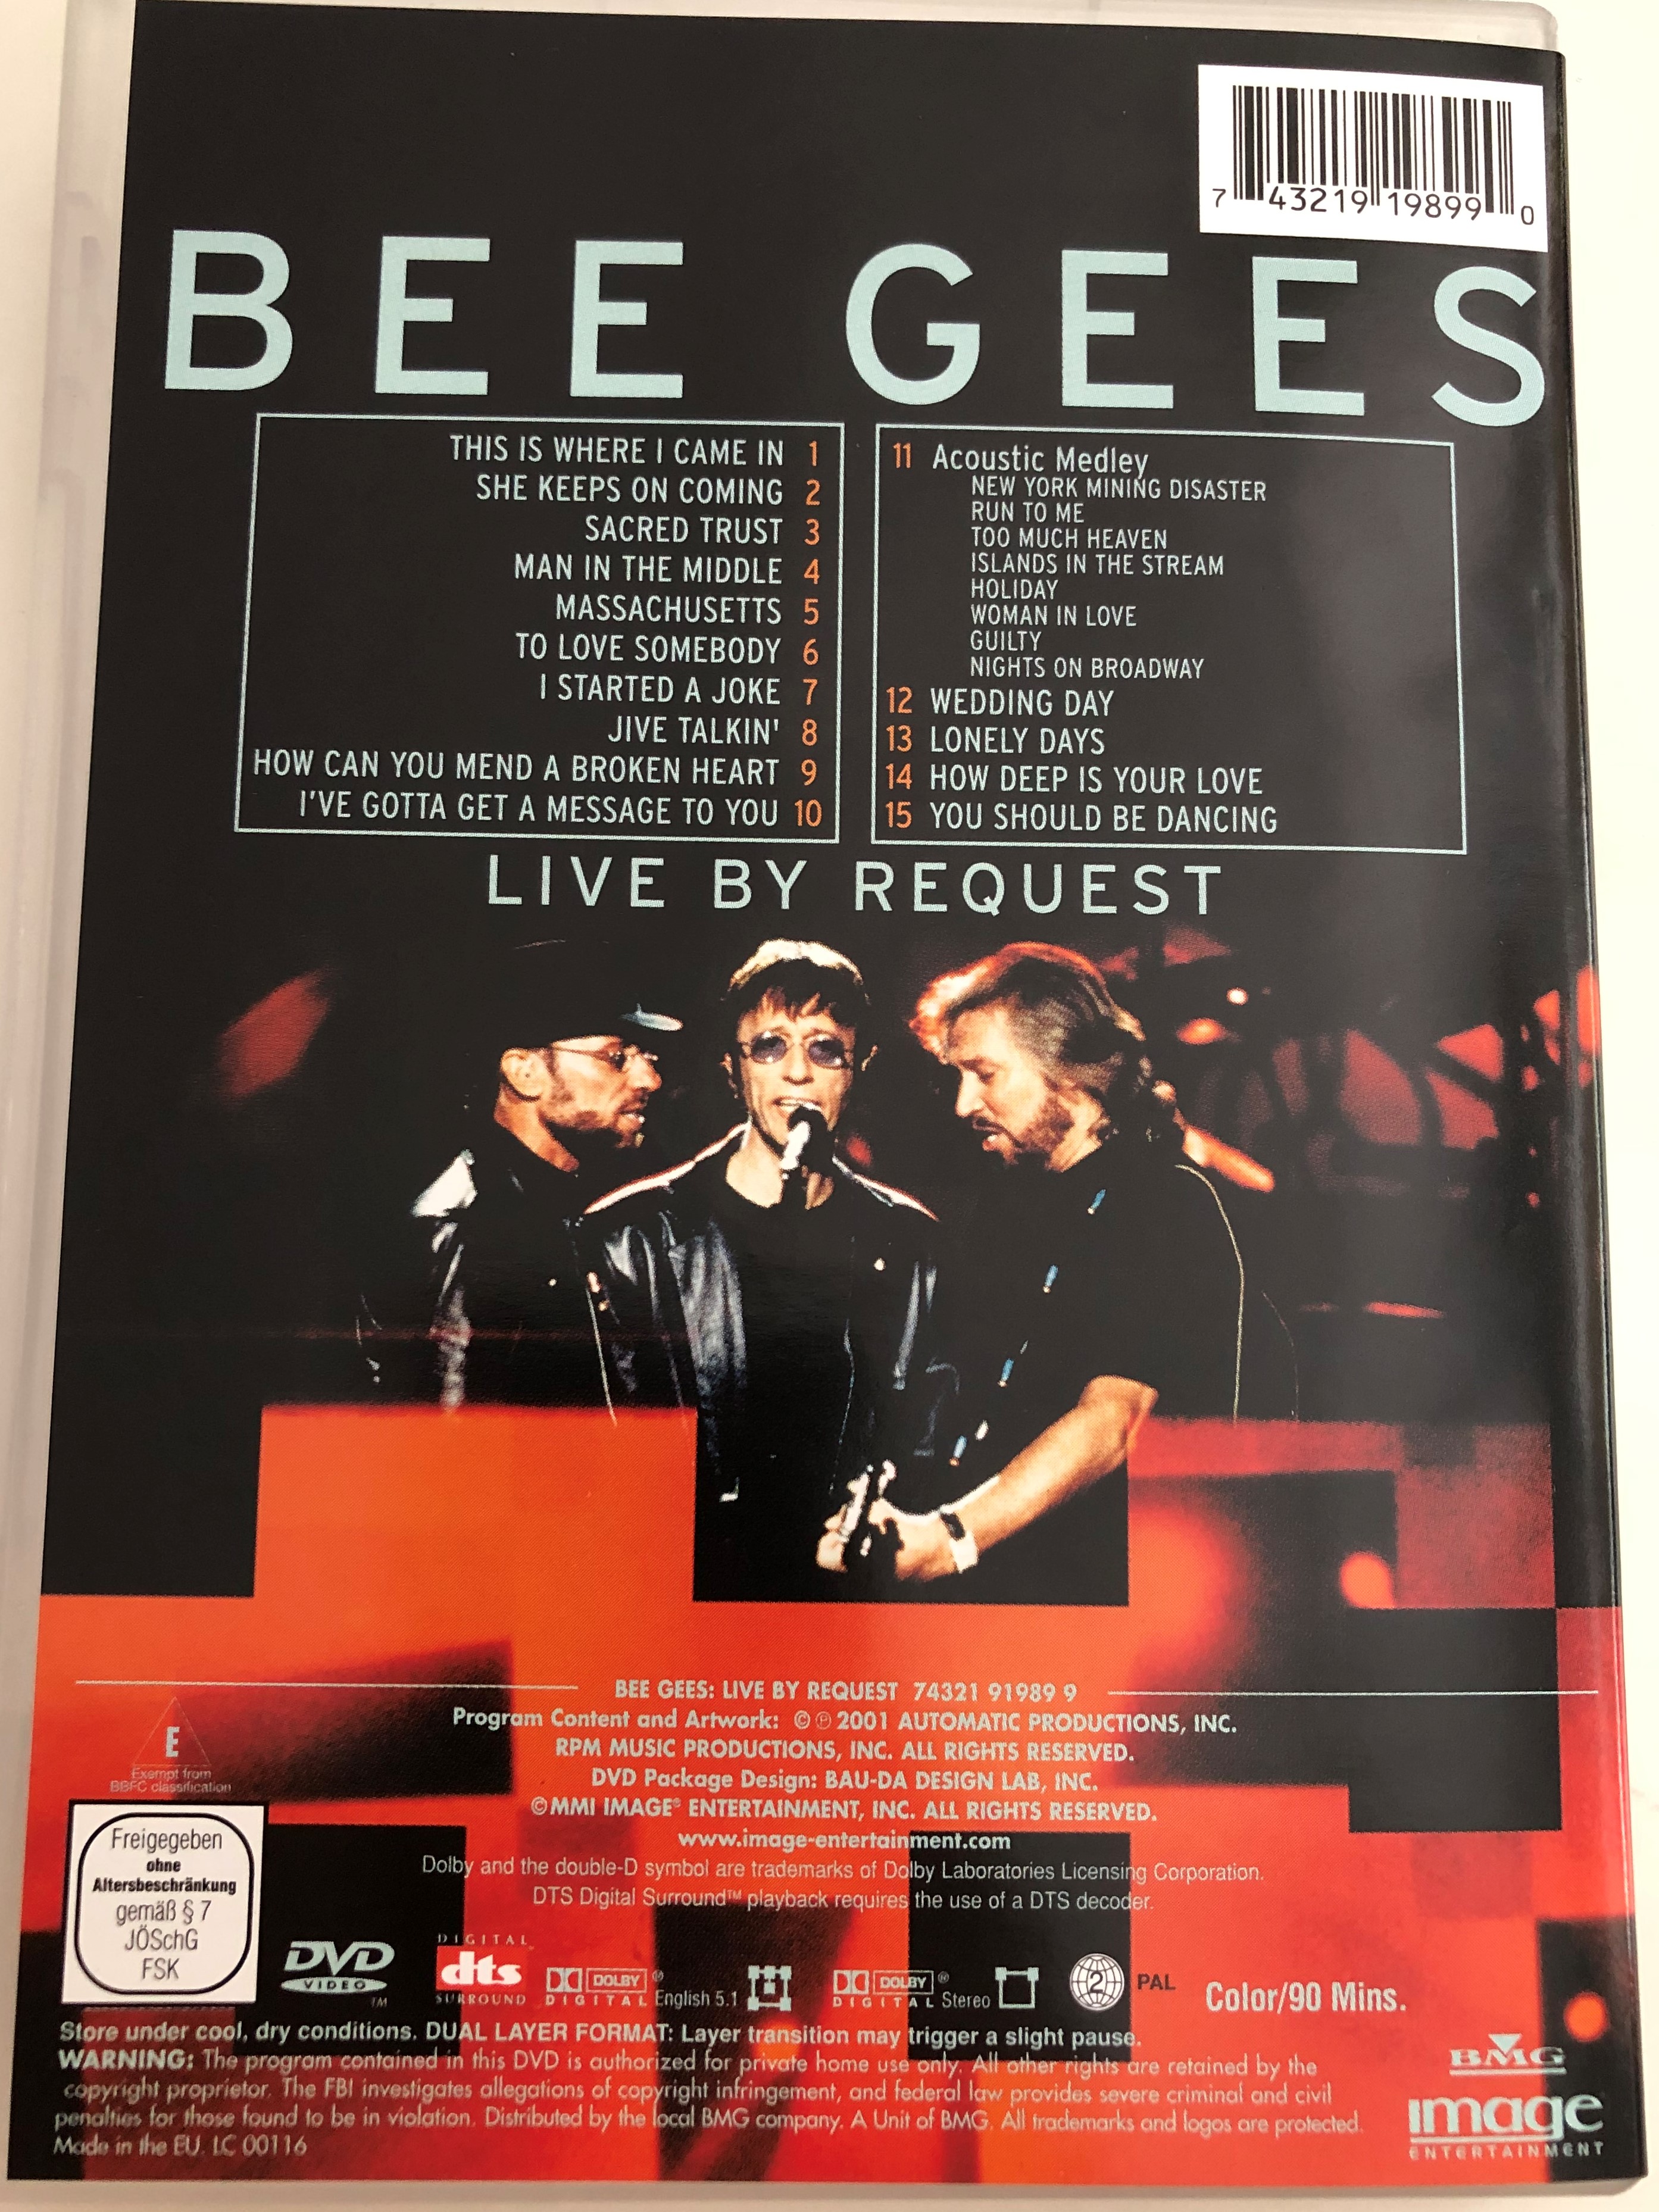 -bee-gees-live-by-request-dvd-2001-sacred-trust-man-in-the-middle-how-can-you-mend-a-broken-heart-bmg-3-.jpg